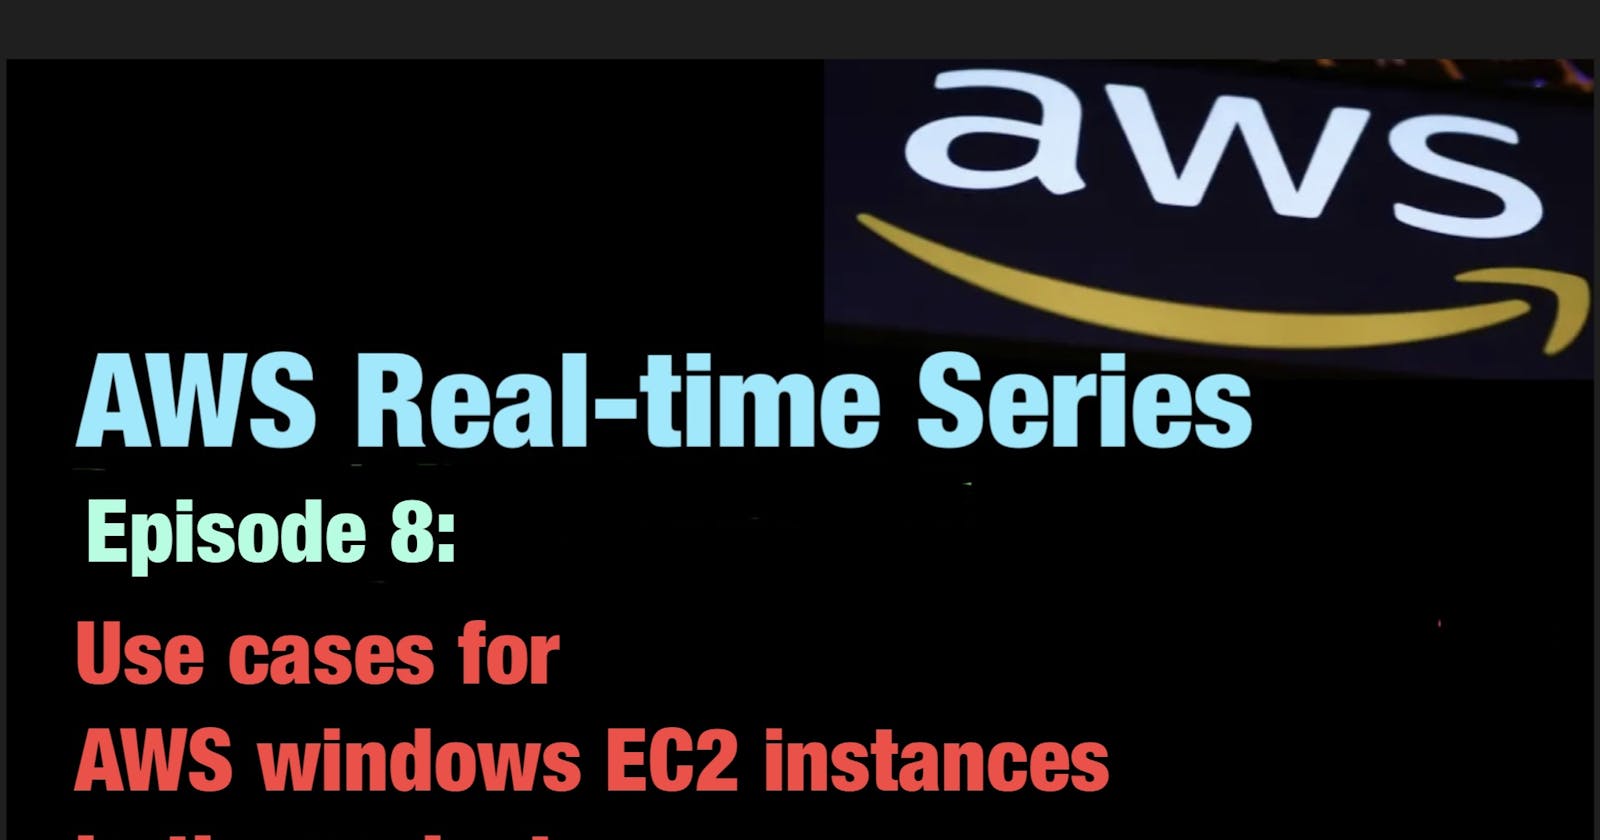 Why AWS windows EC2 instances are used in the project?